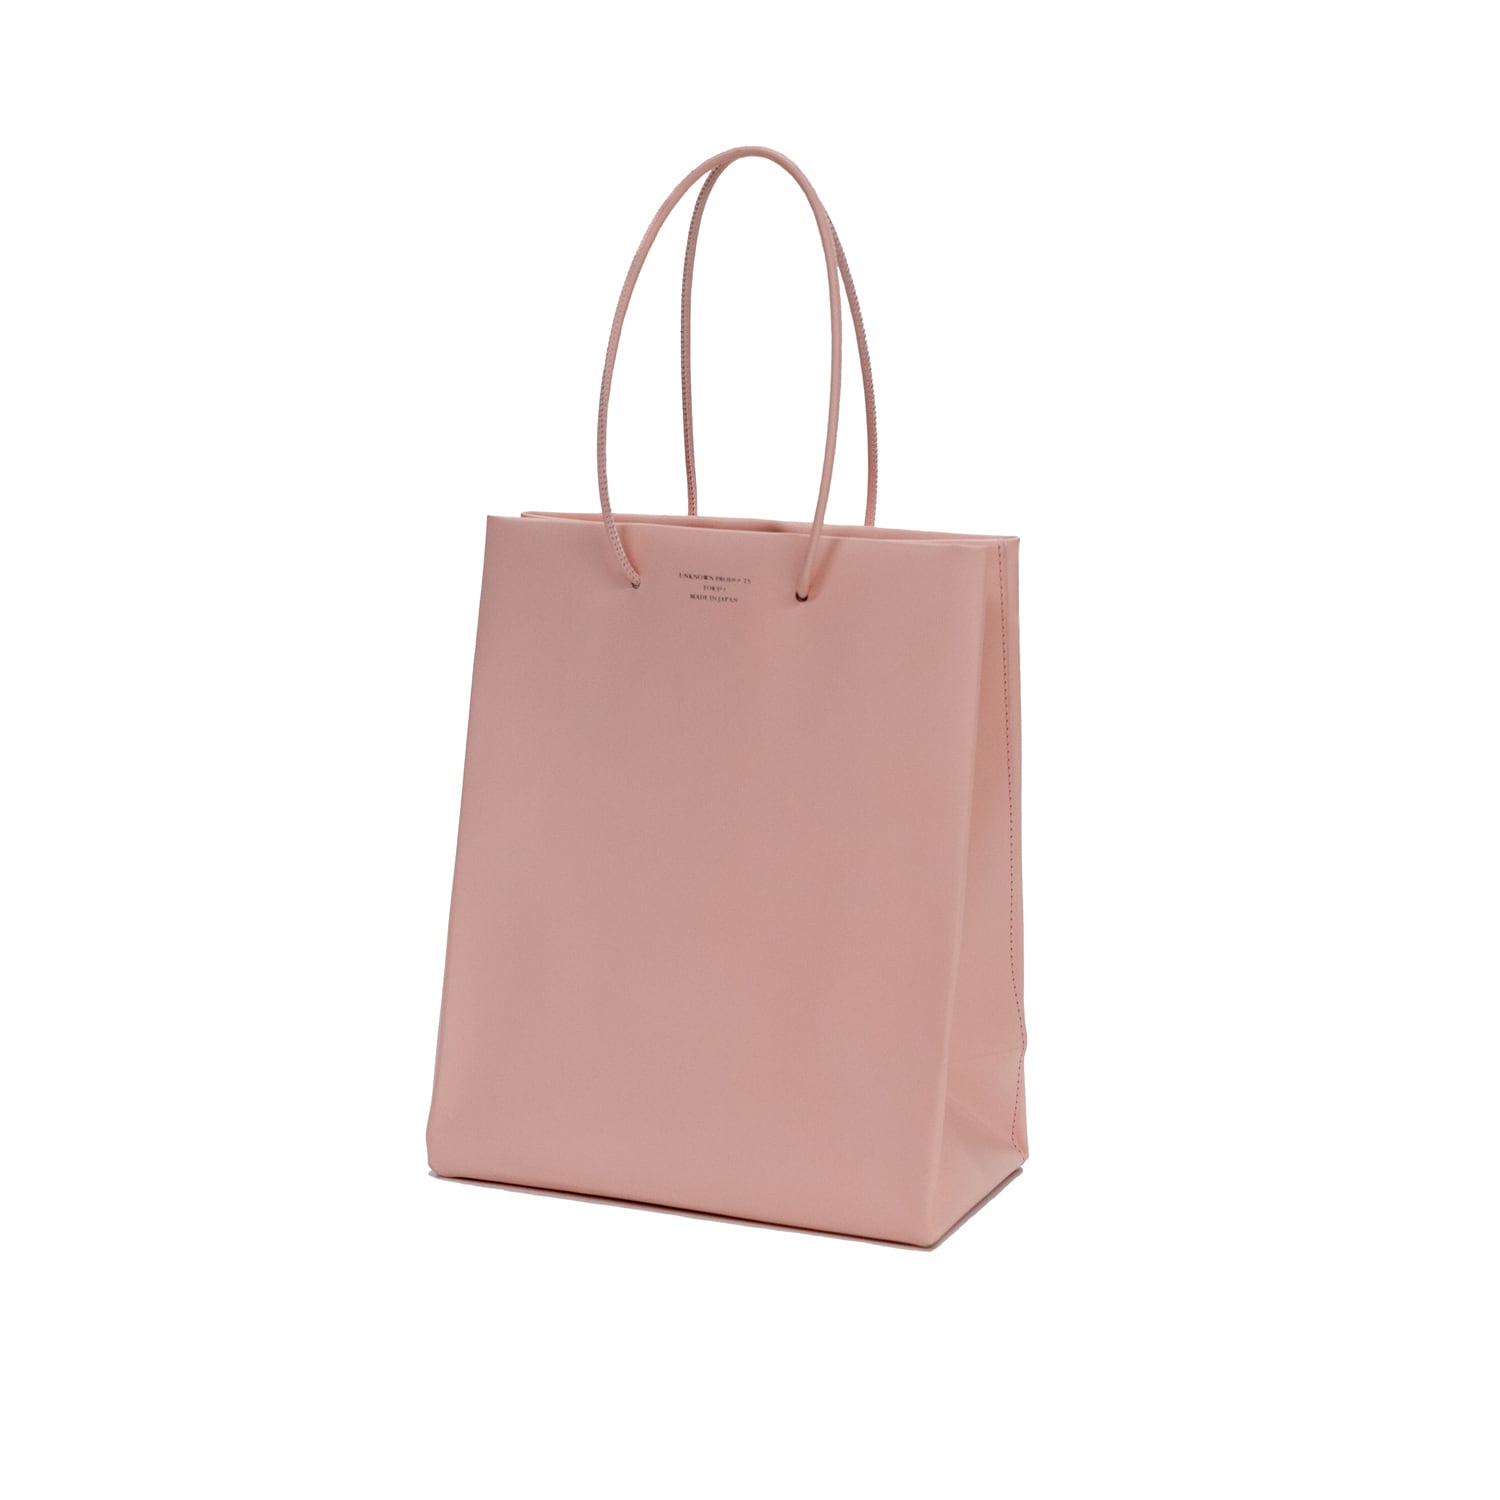 Leather Paper Bag - Pink | UNKNOWN PRODUCTS（アンノウンプロダクツ）公式オンラインストア